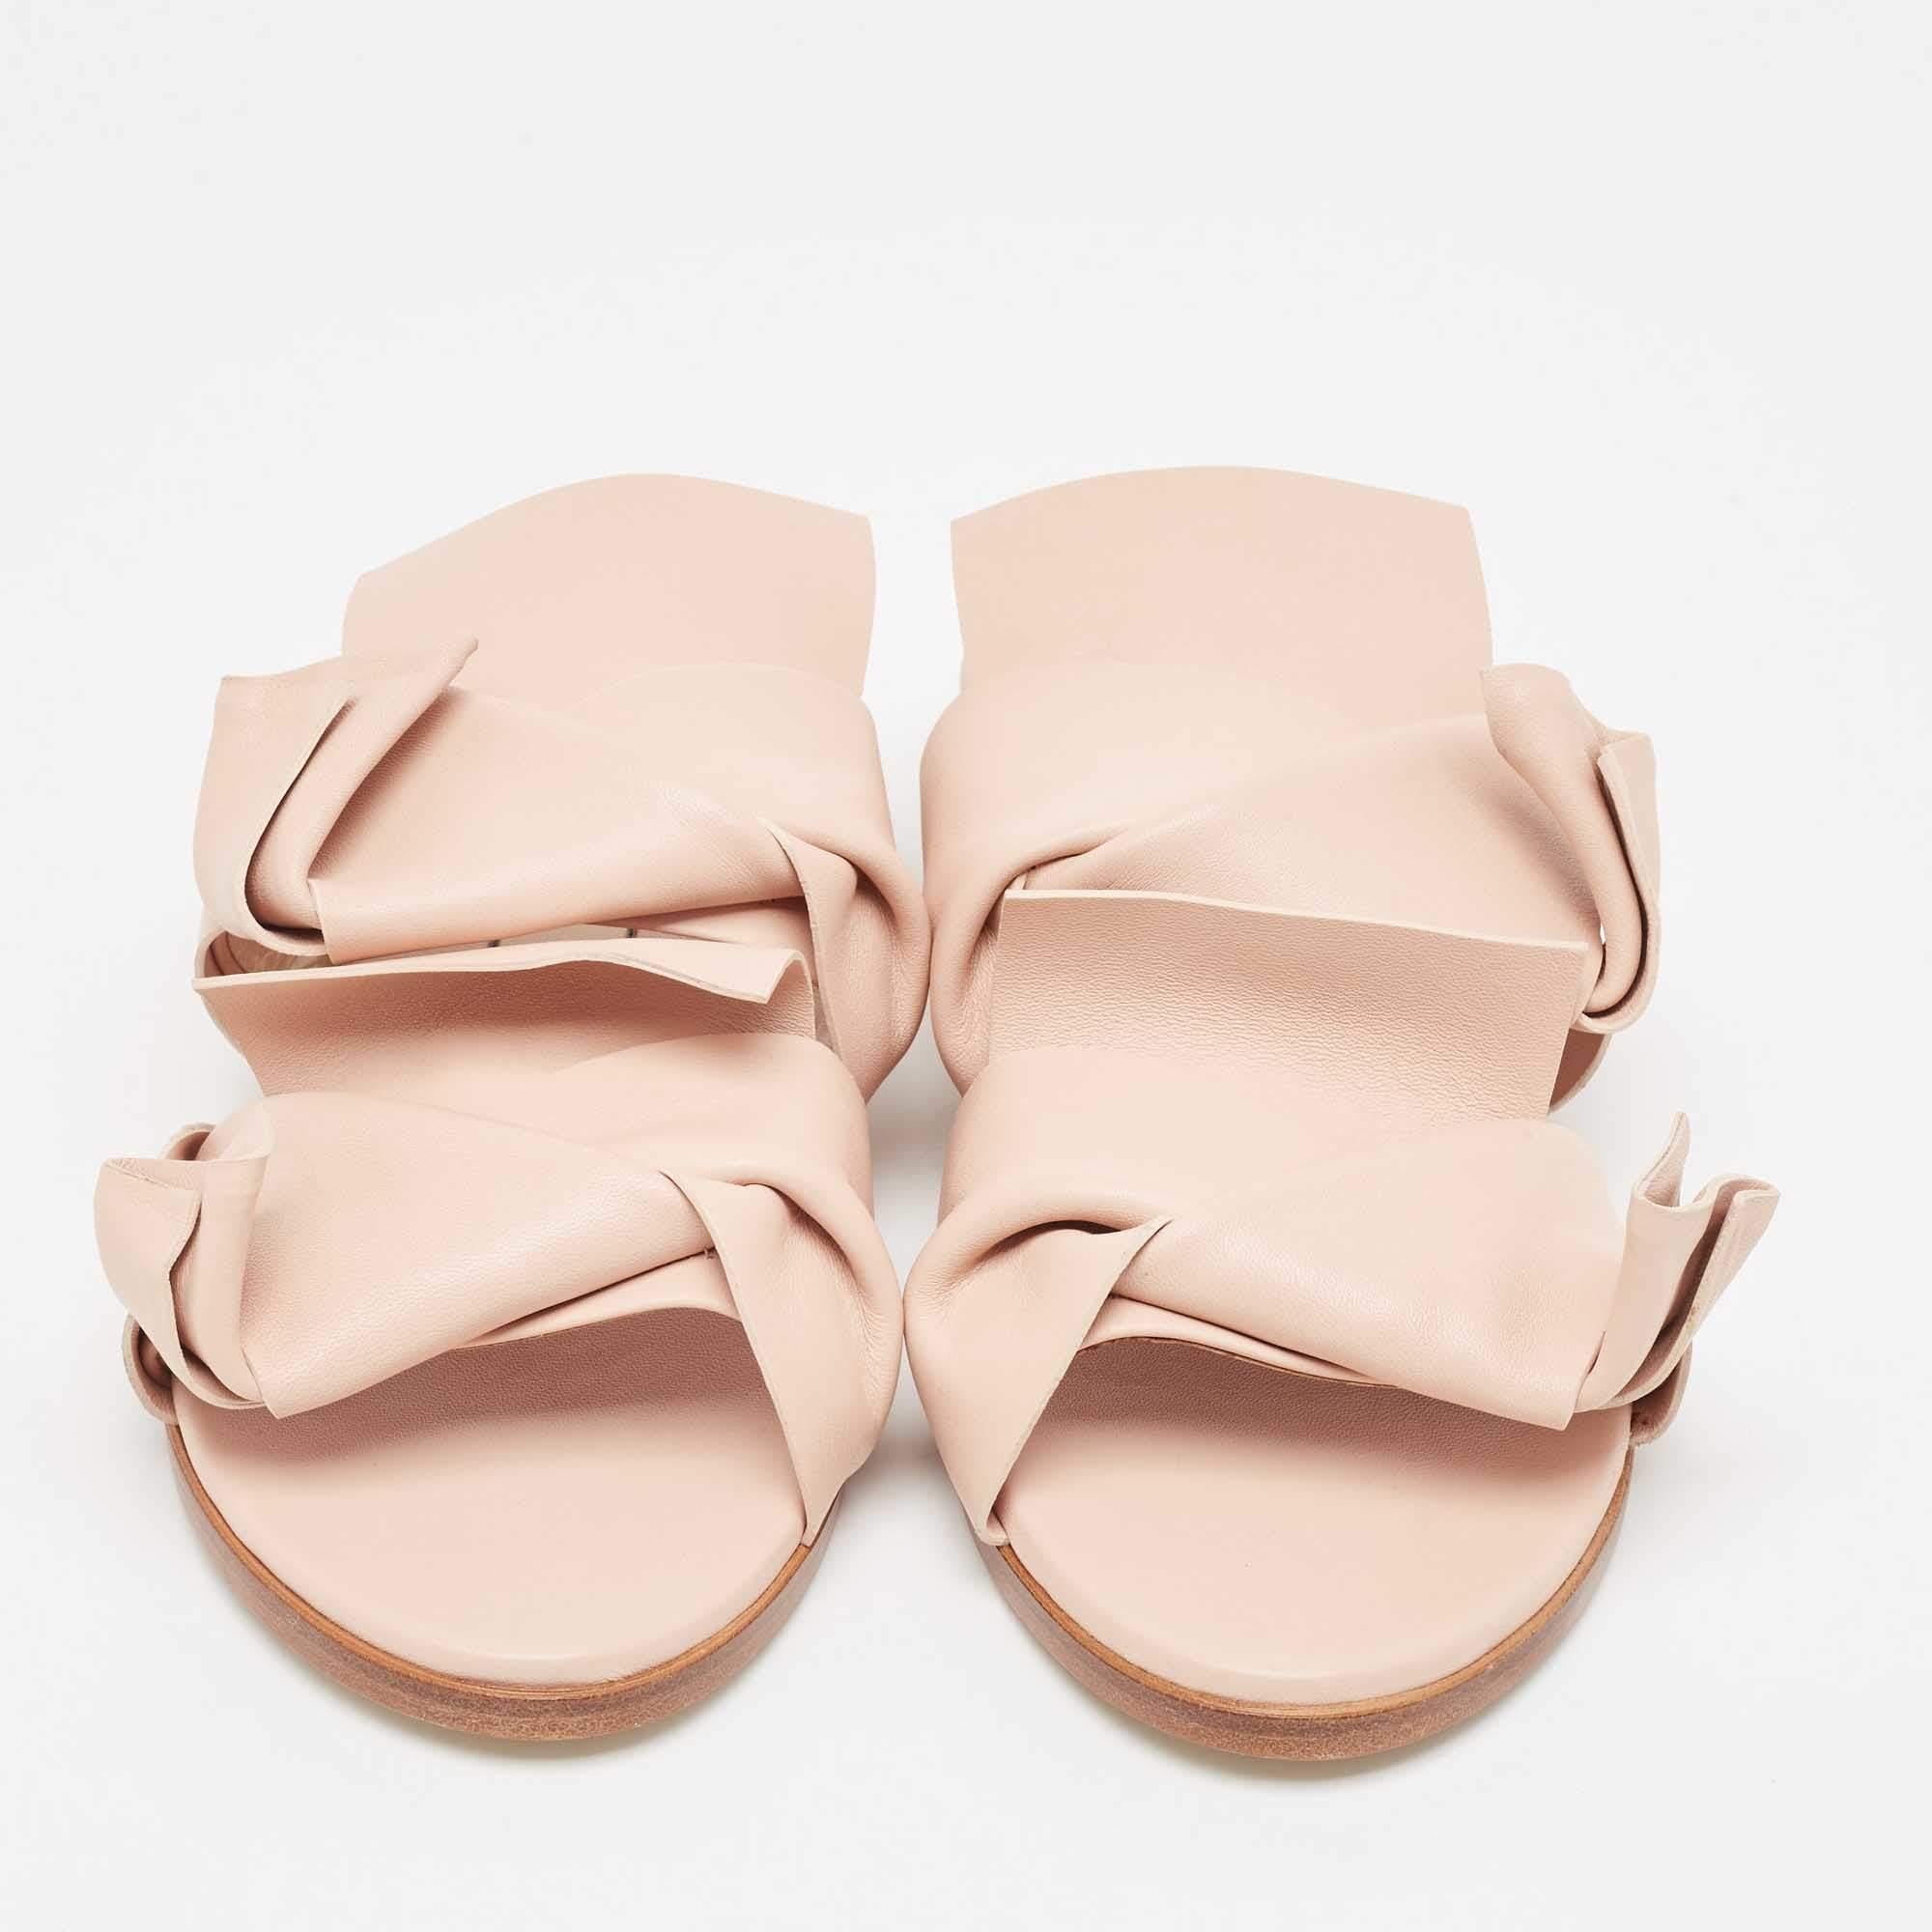 Frame your feet with these N21 beige flat sandals. Created using the best materials, the flats are perfect with short, midi, and maxi hemlines.

Includes: Original Dustbag, Original Box

